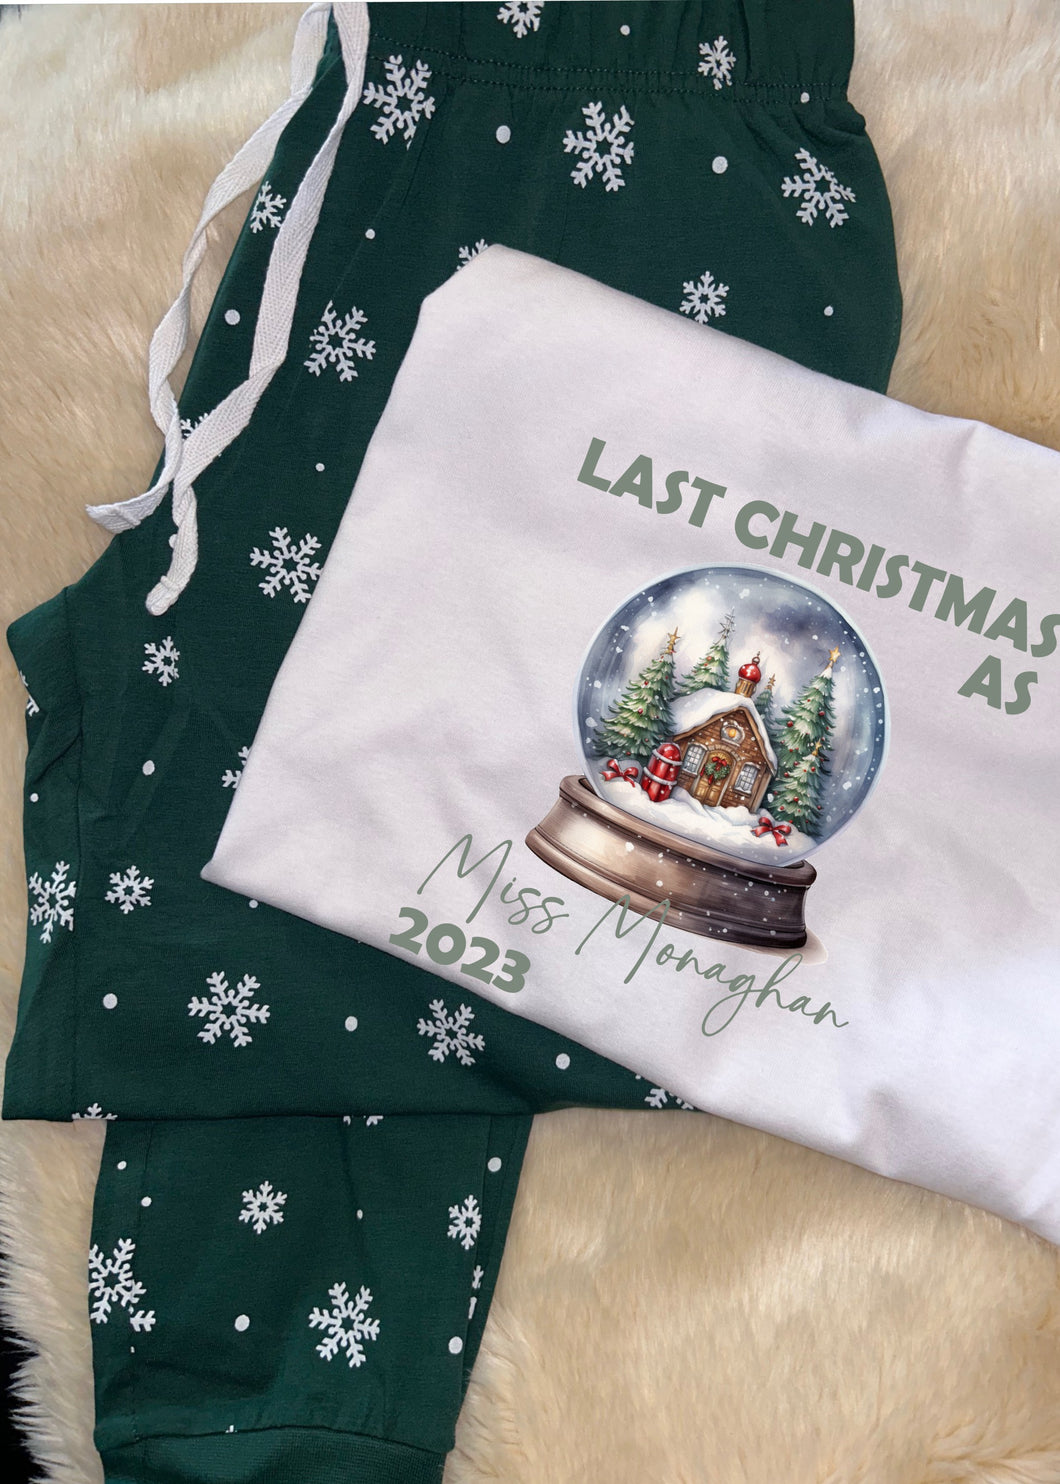 Personalised last Christmas as a Miss (your name and year) print xmas pjs pyjamas your surname - green snow globe design, snowflake bottoms